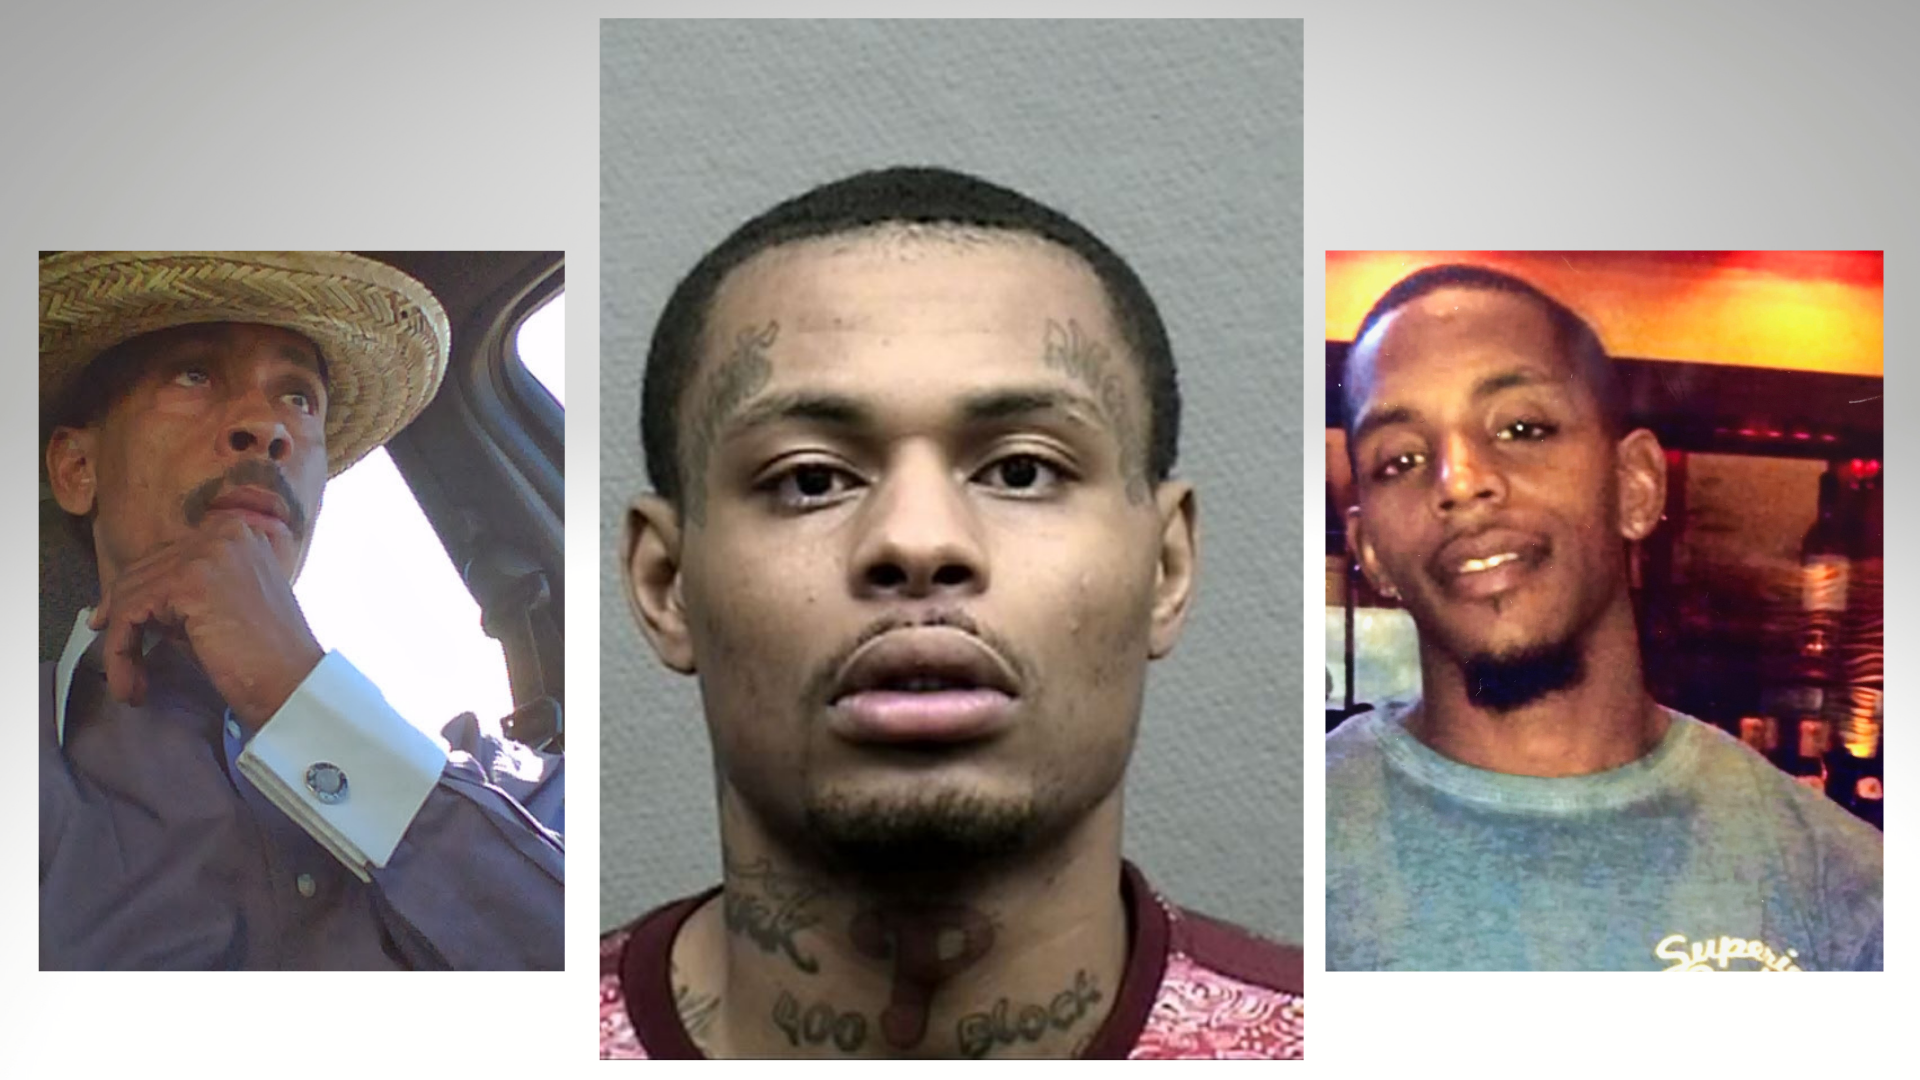 Watt At adskille Formode He is an absolute killer': Treetop Piru gang member gets life in prison;  killed 2 victims and 2 dogs, DA says